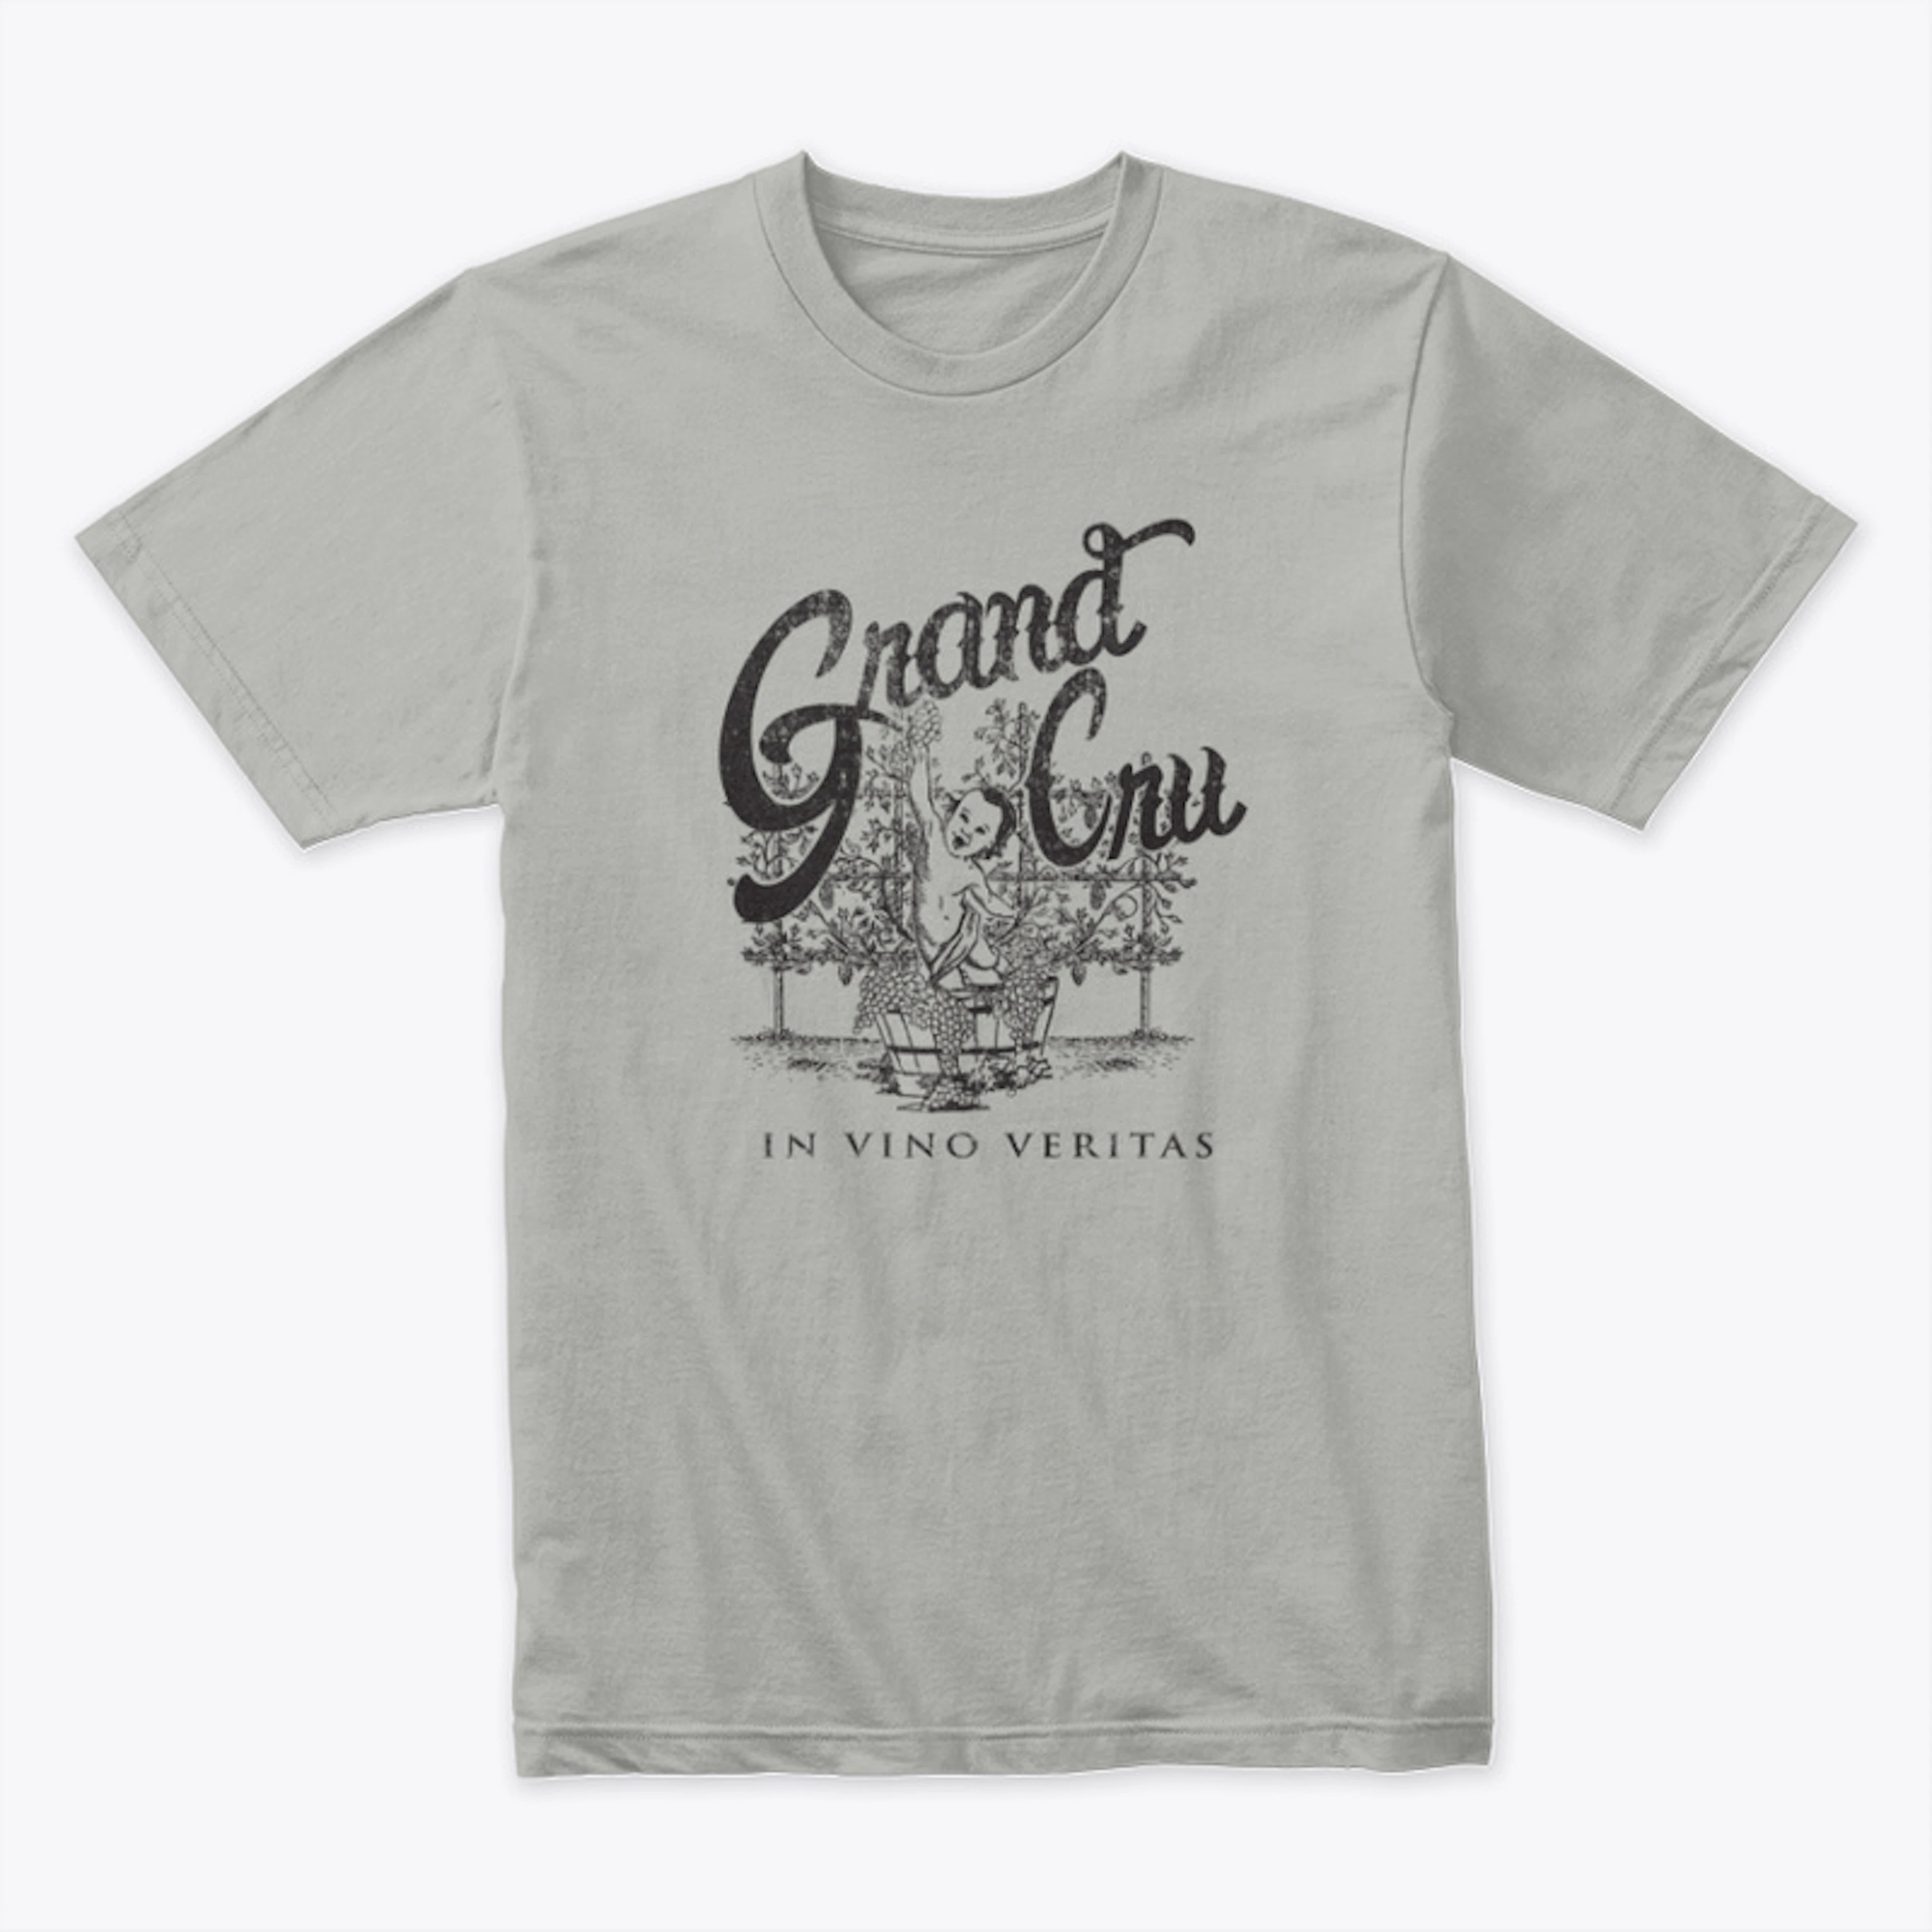 Grand Cru T-shirt For Wine Lovers